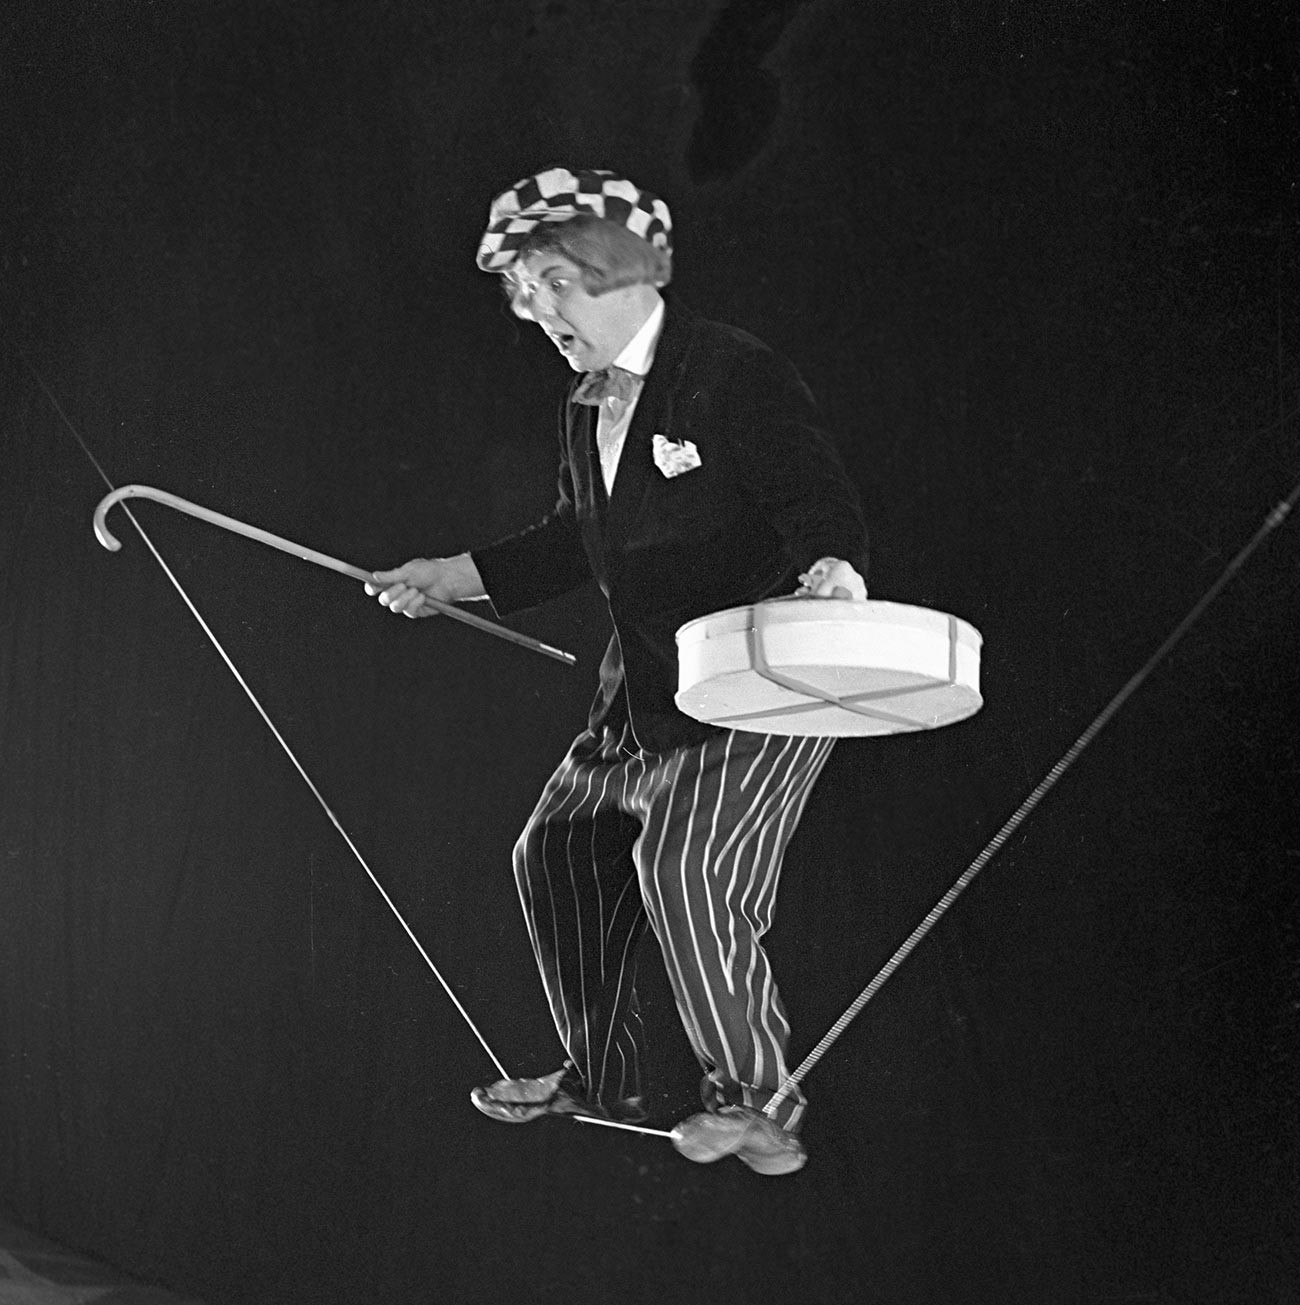 Popov’s first professional circus experience was that of an ‘eccentric tightrope walker’.